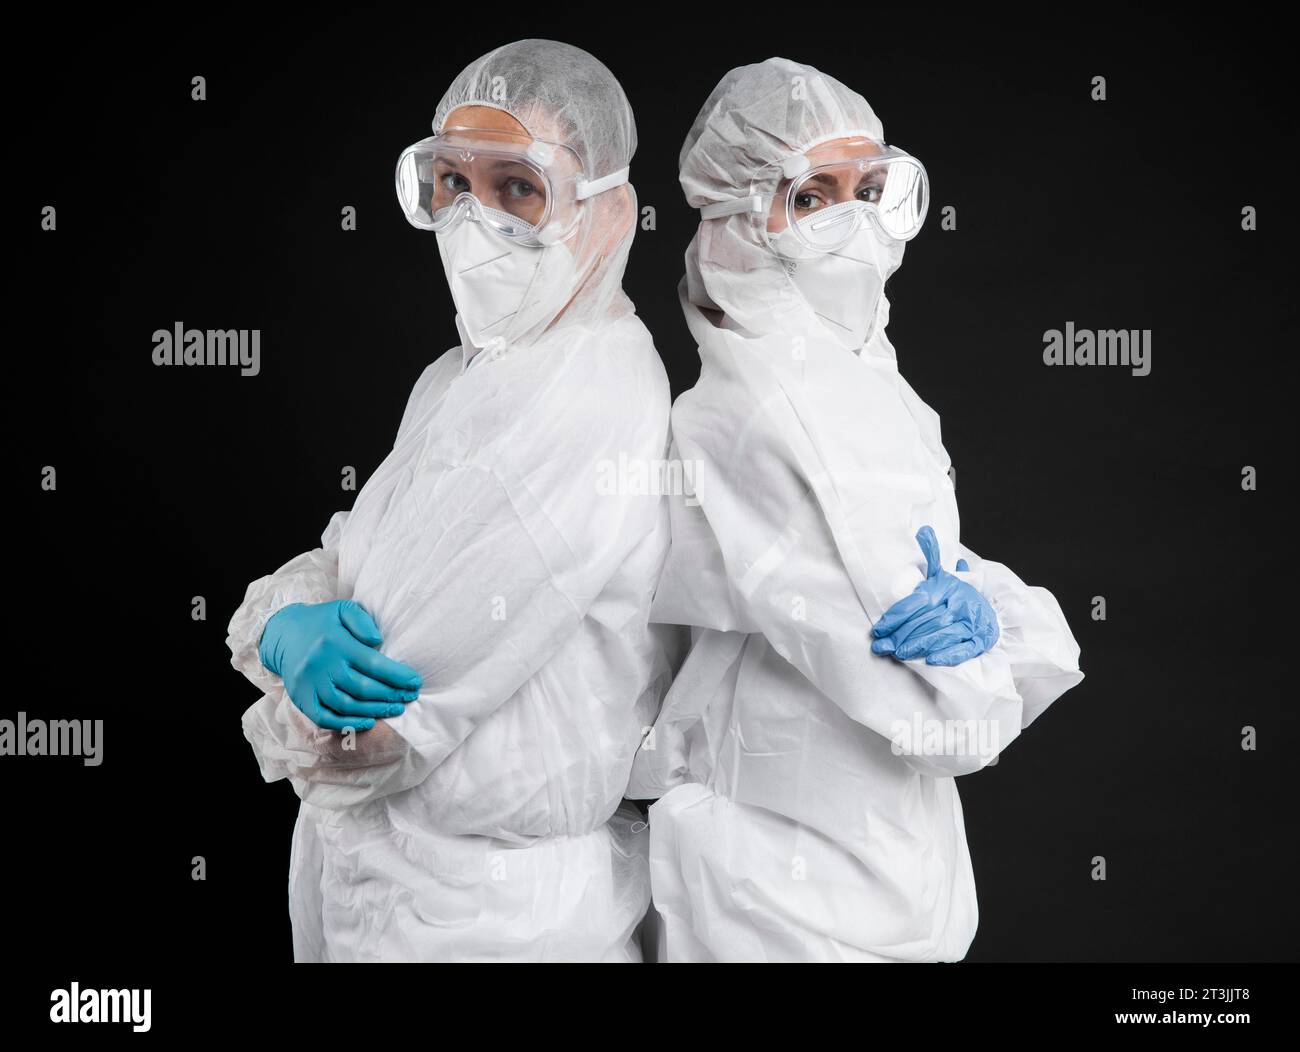 Doctors posing while wearing protective wear Stock Photo